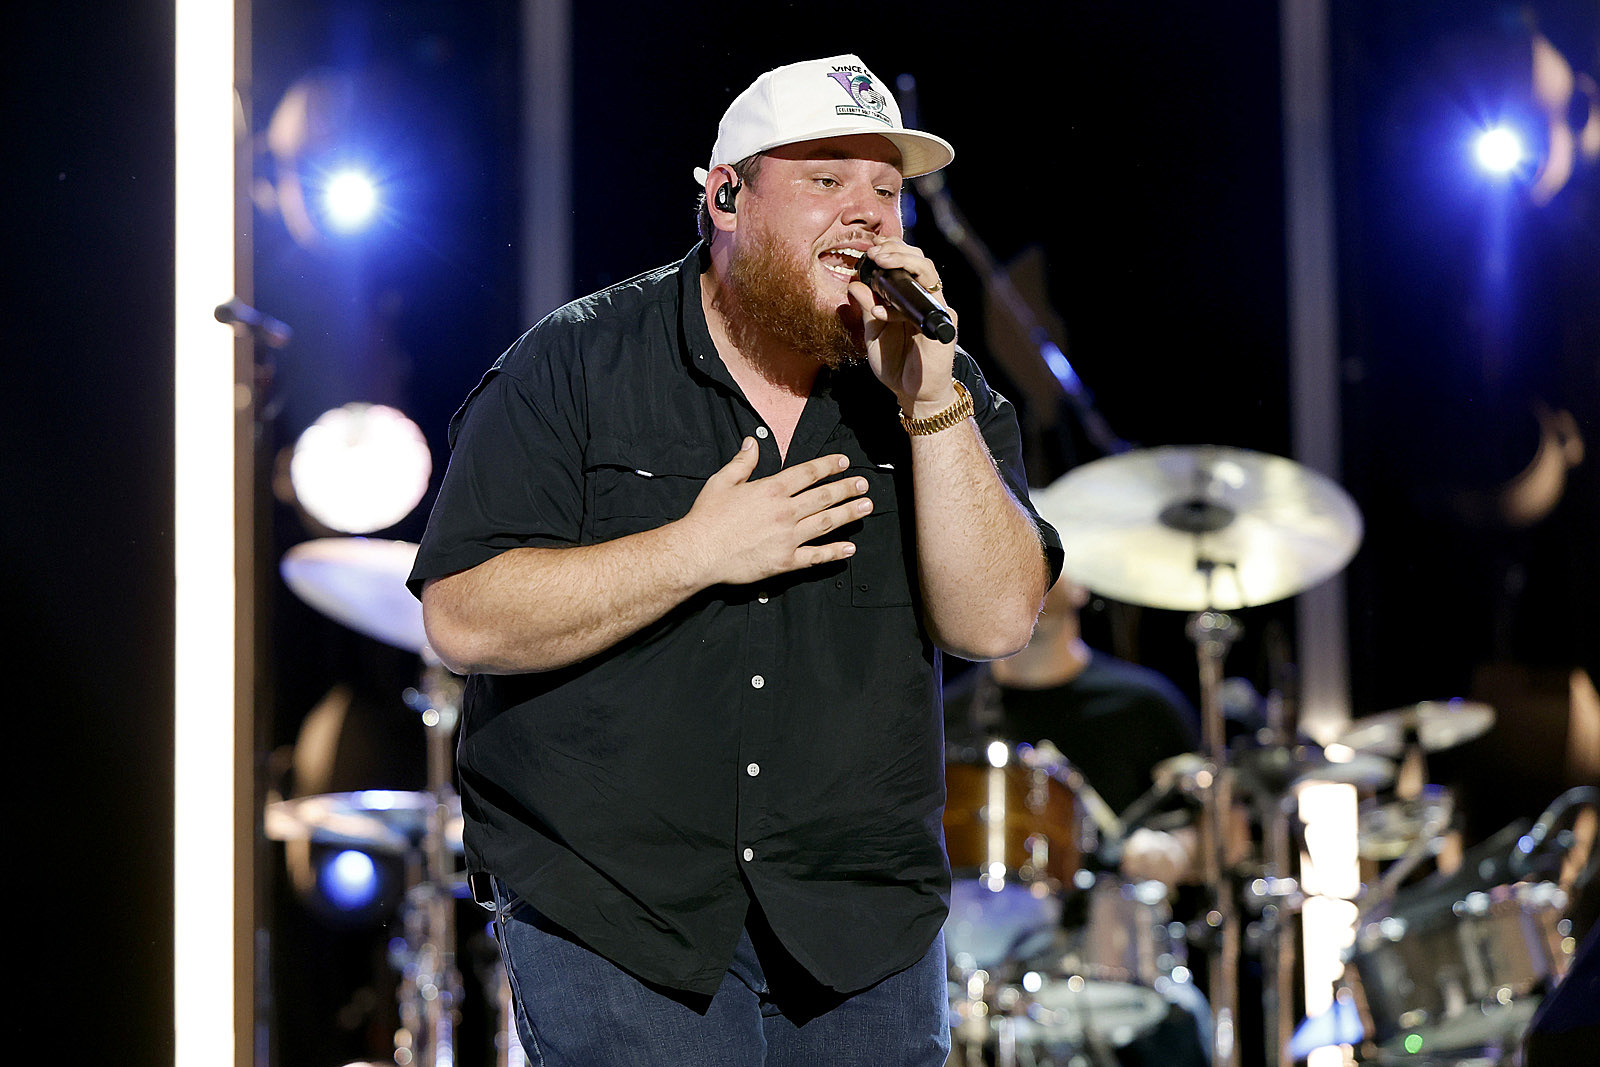 Here Are the Lyrics to Luke Combs’ ‘Where the Wild Things Are’ WKKY